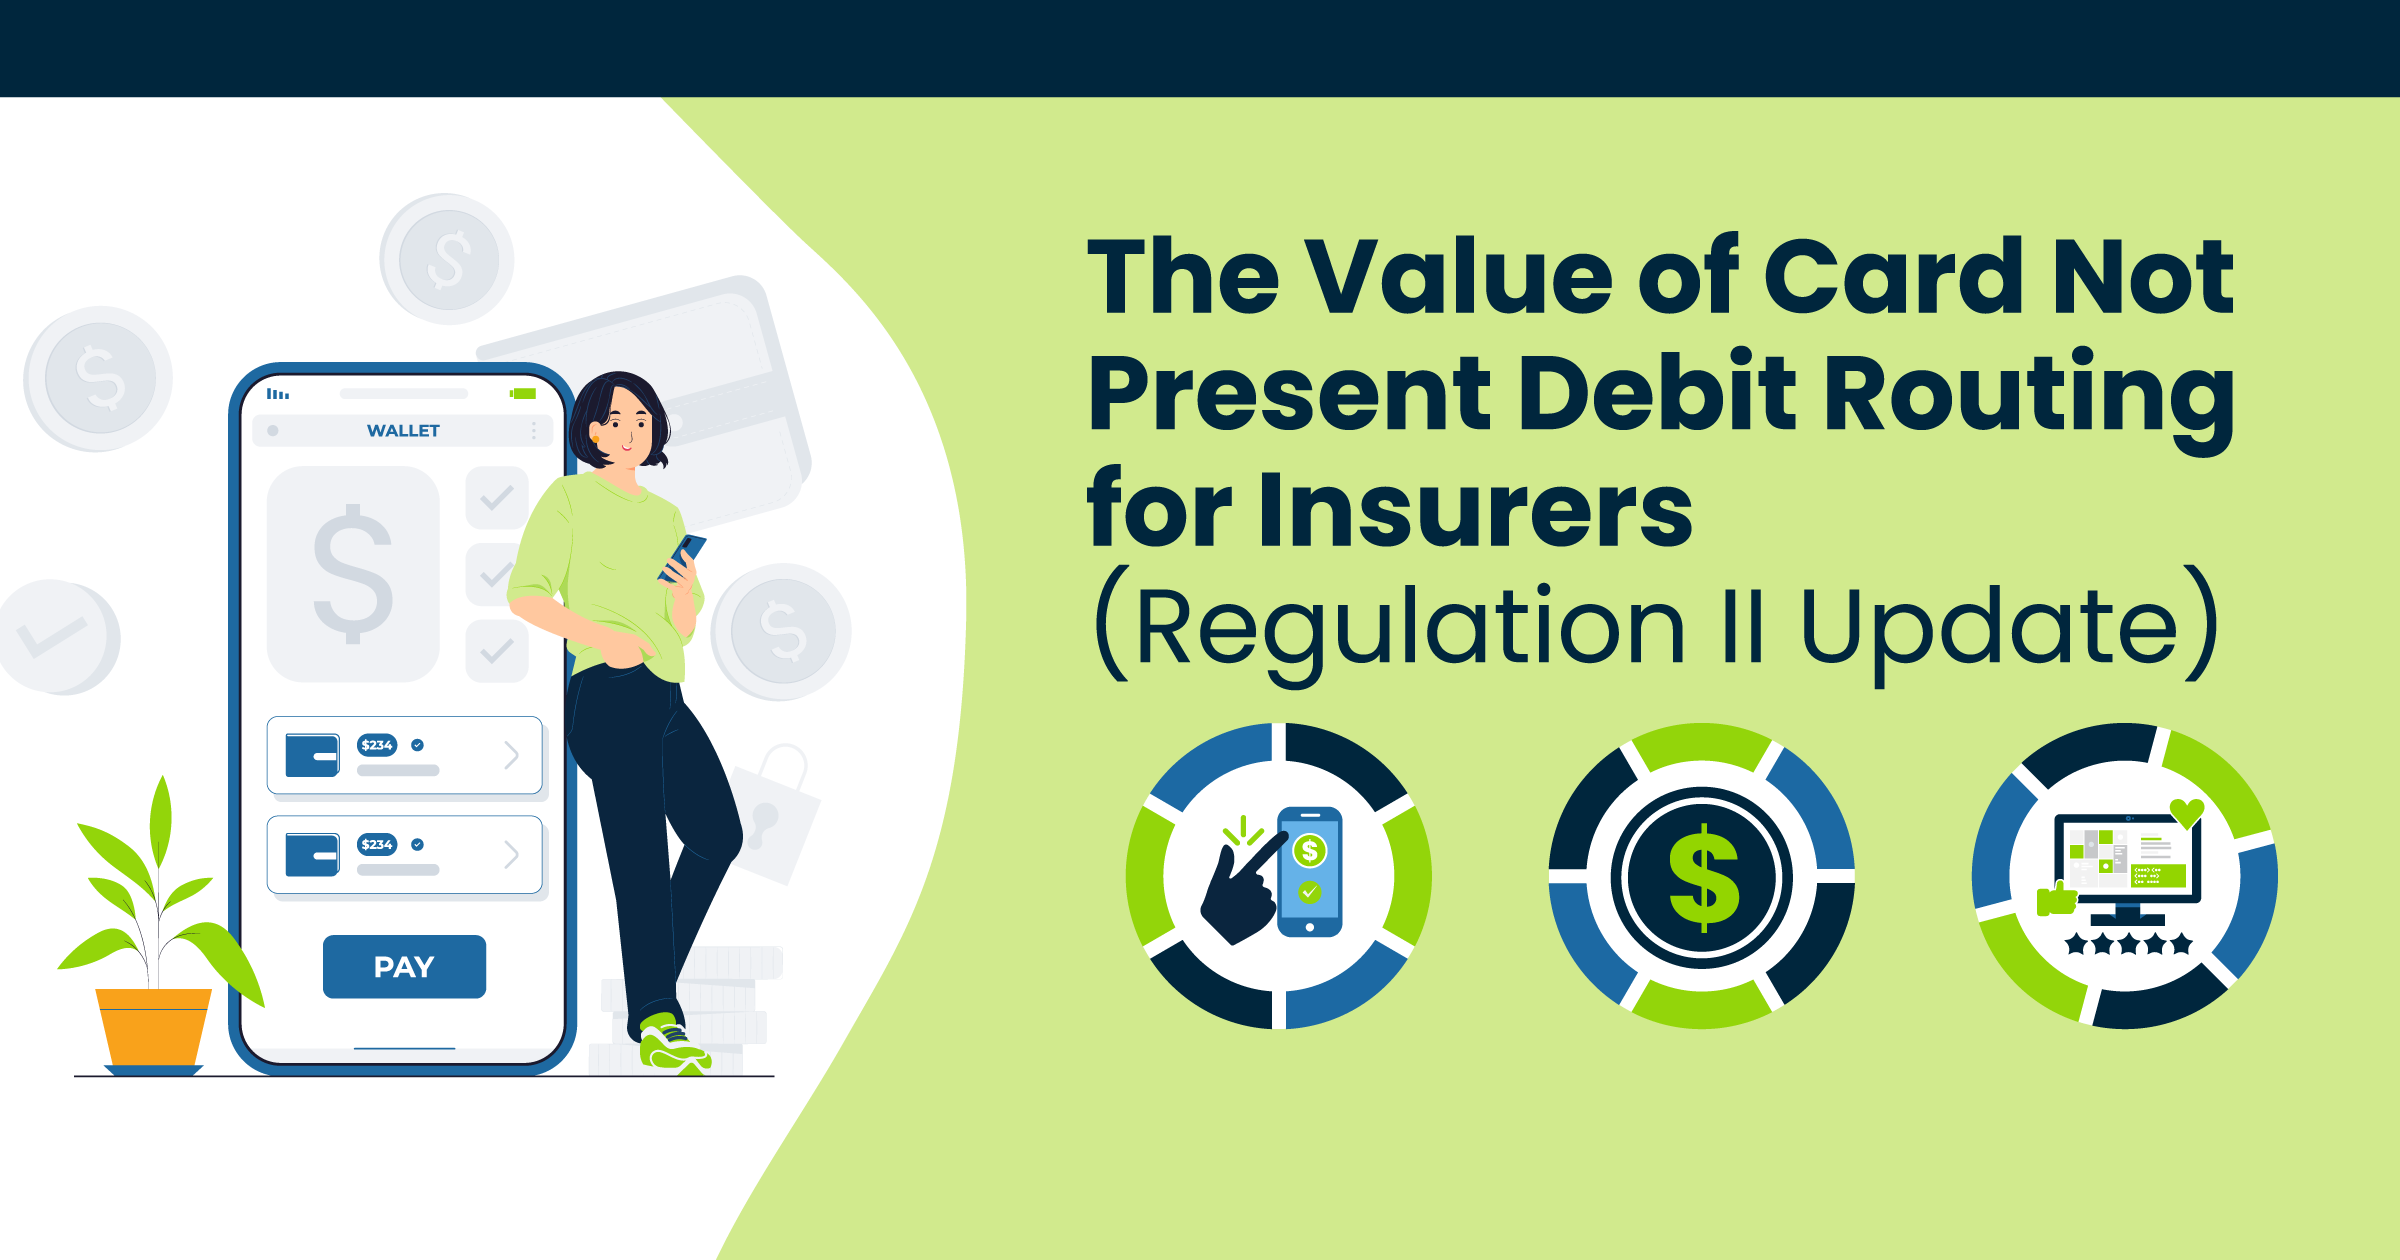 The Value of Card Not Present Debit Routing for Insurers (Regulation II Update) Illustration